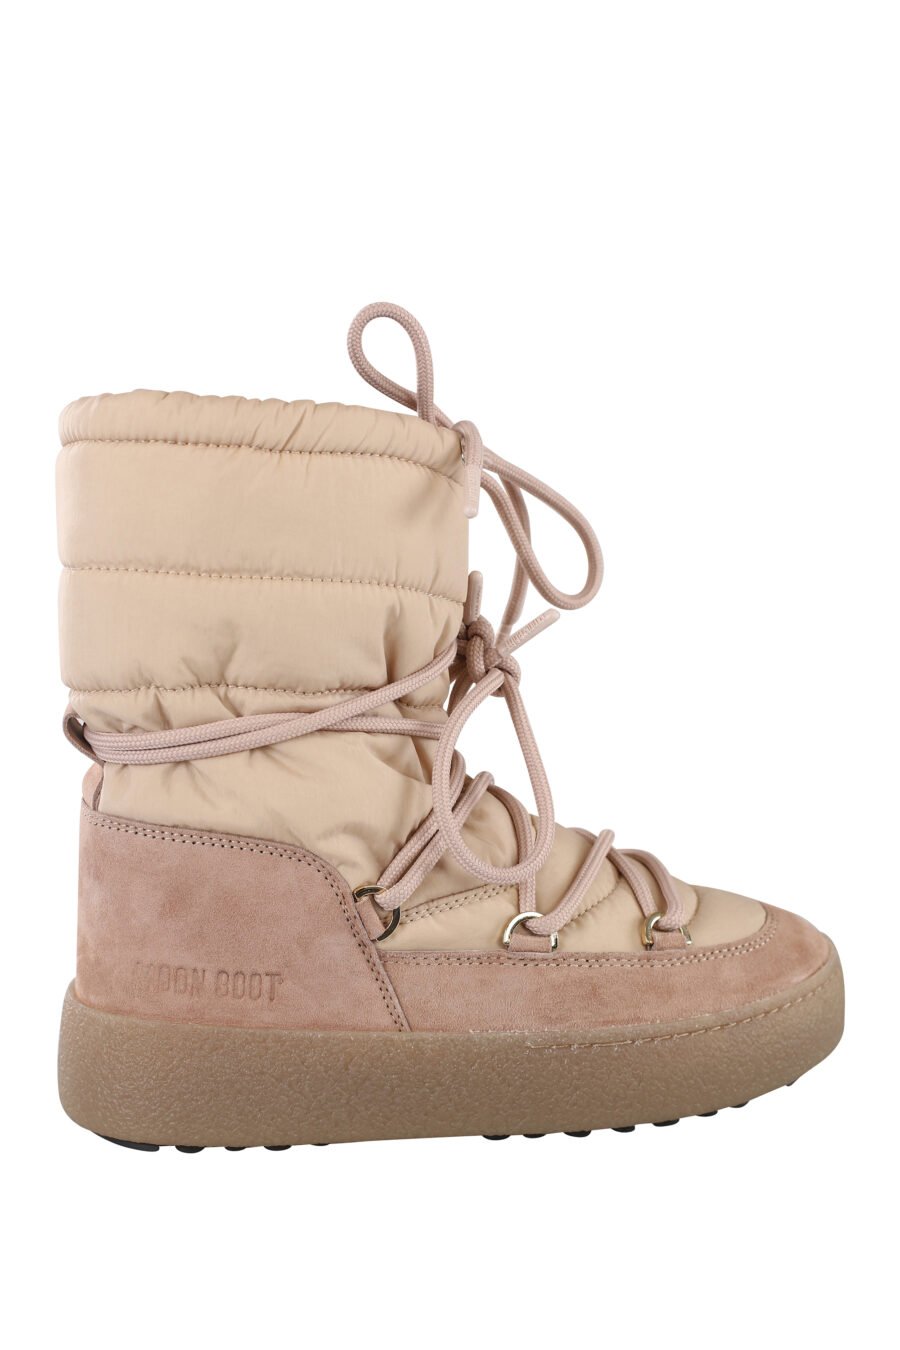 Boots "LTRACK" in pink with nylon - IMG 6811 1